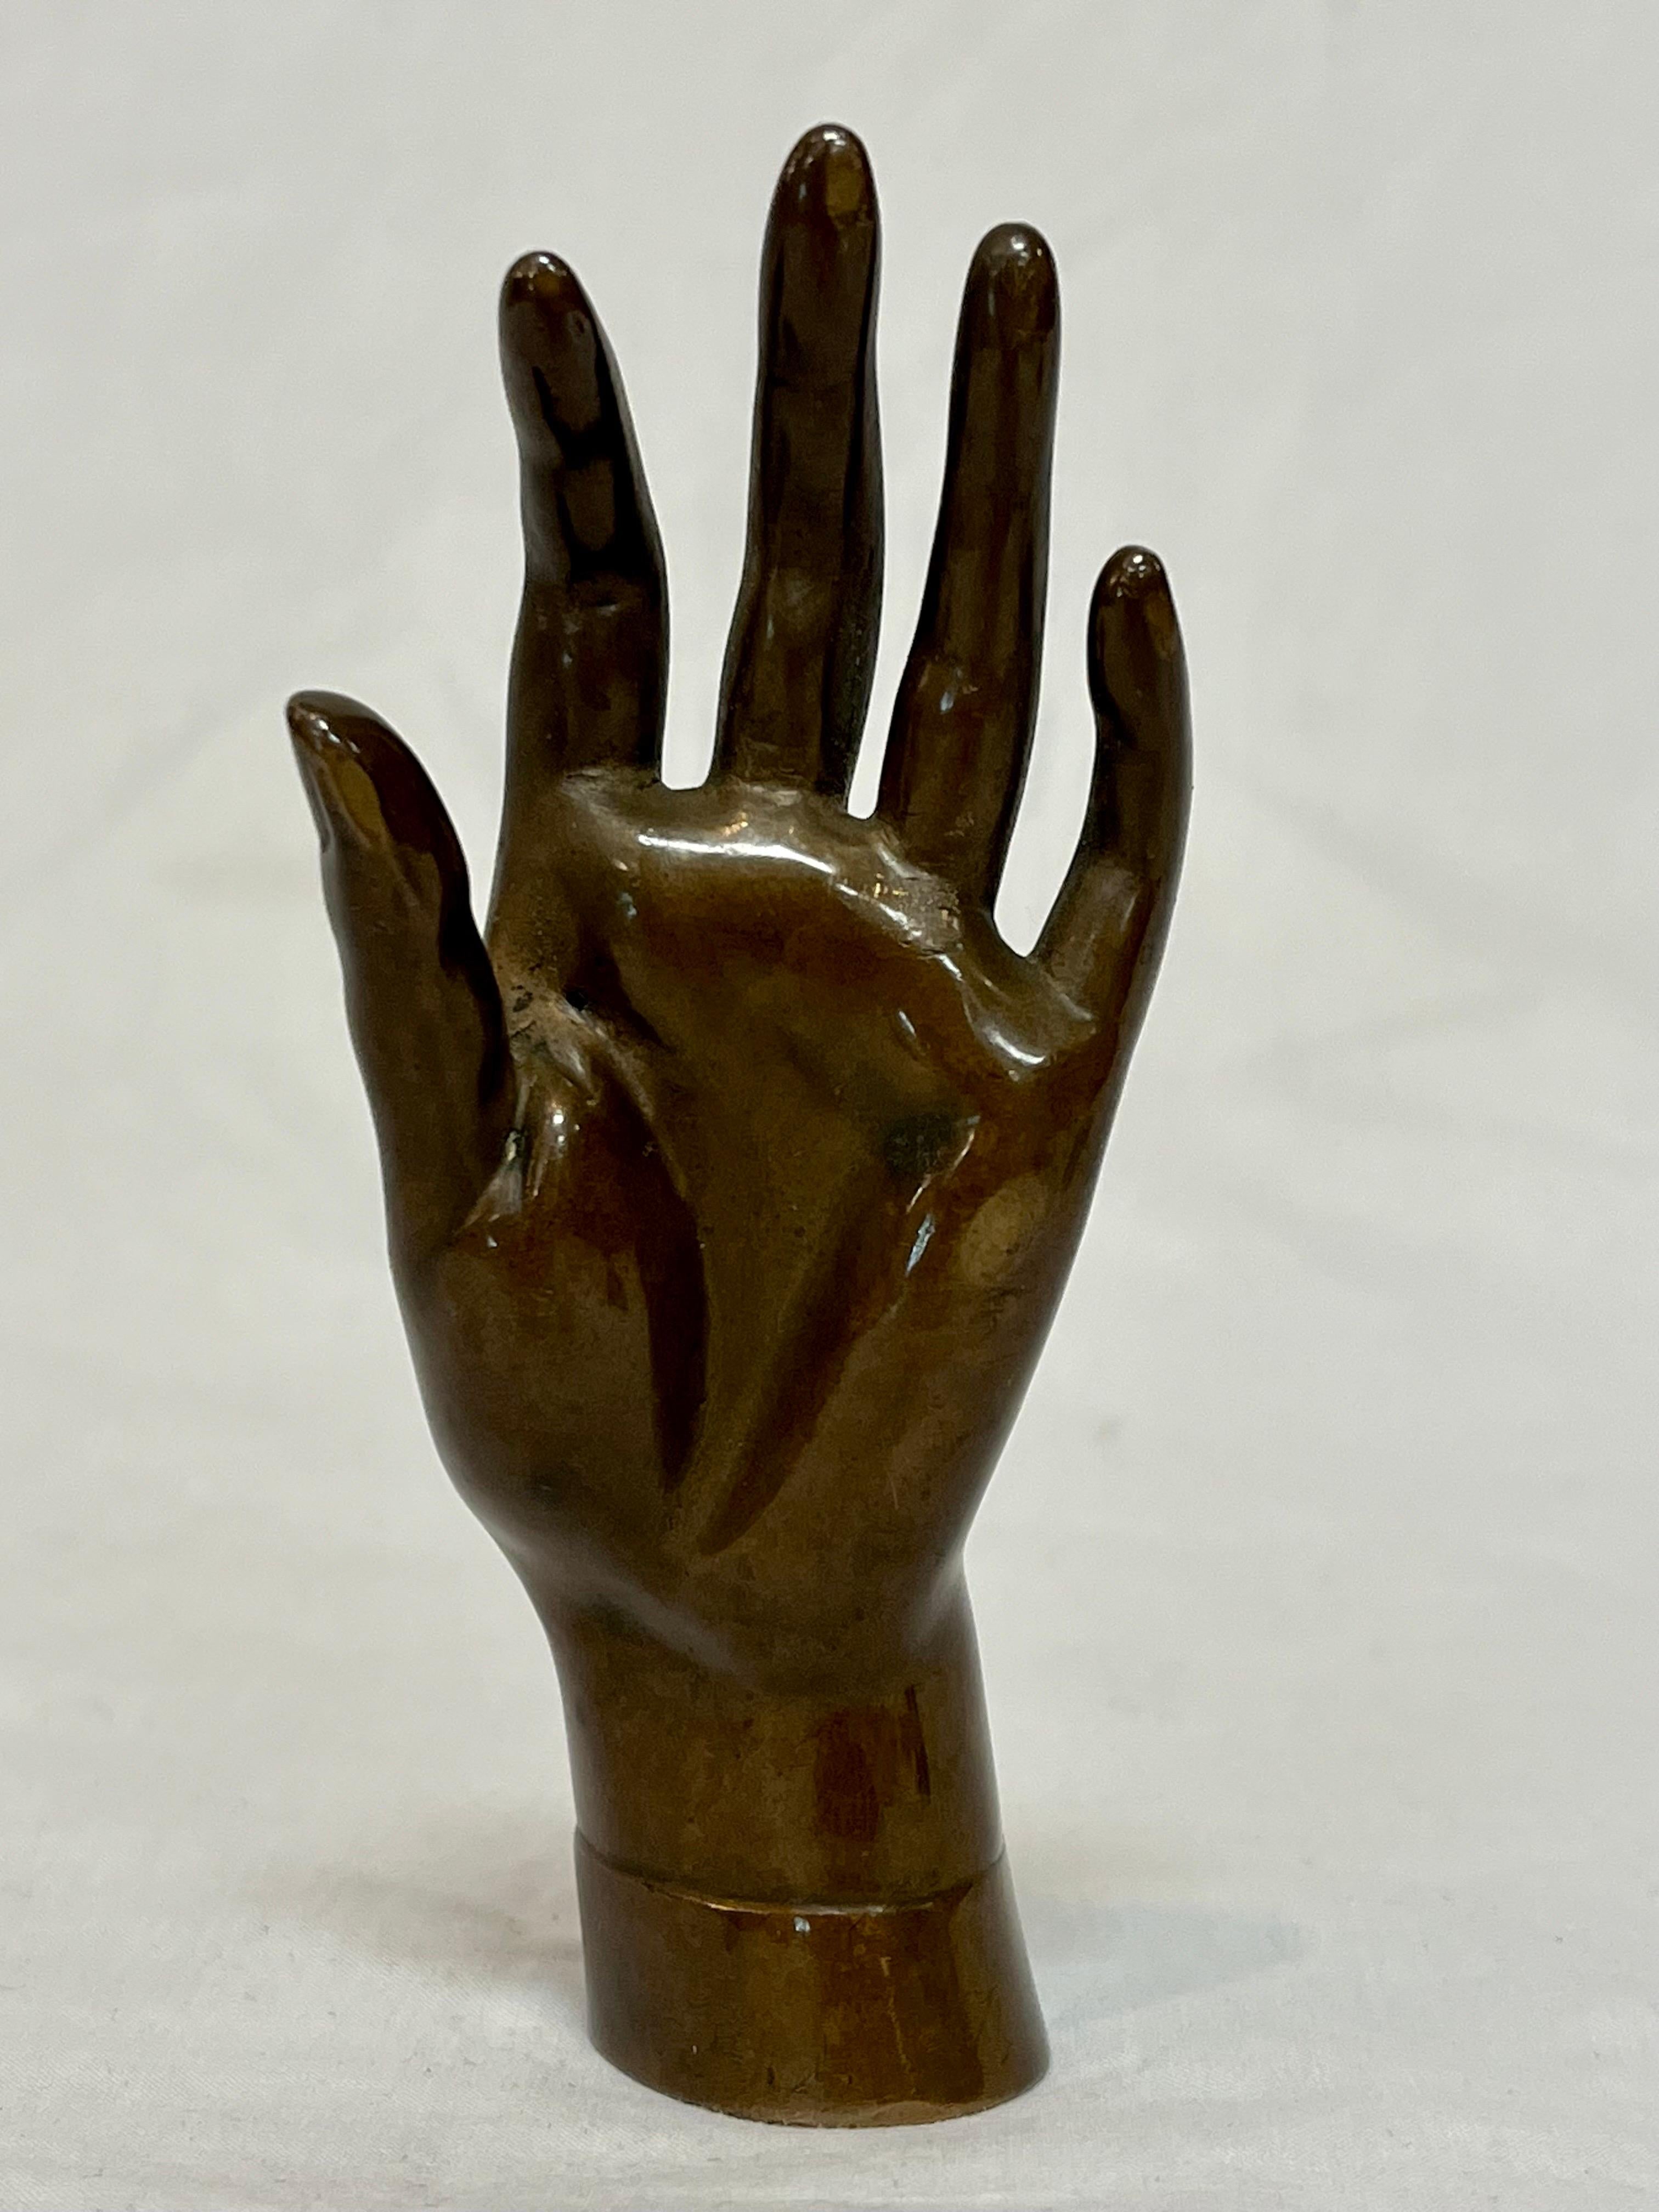 A gorgeously refined and delicate bronze hand paperweight by Barbedienne. The story goes that this is the hand of Grand Duchess Maria Pavlovna. But that's the story, not the history. I'm not sure if this is her hand. To further complicate the story,